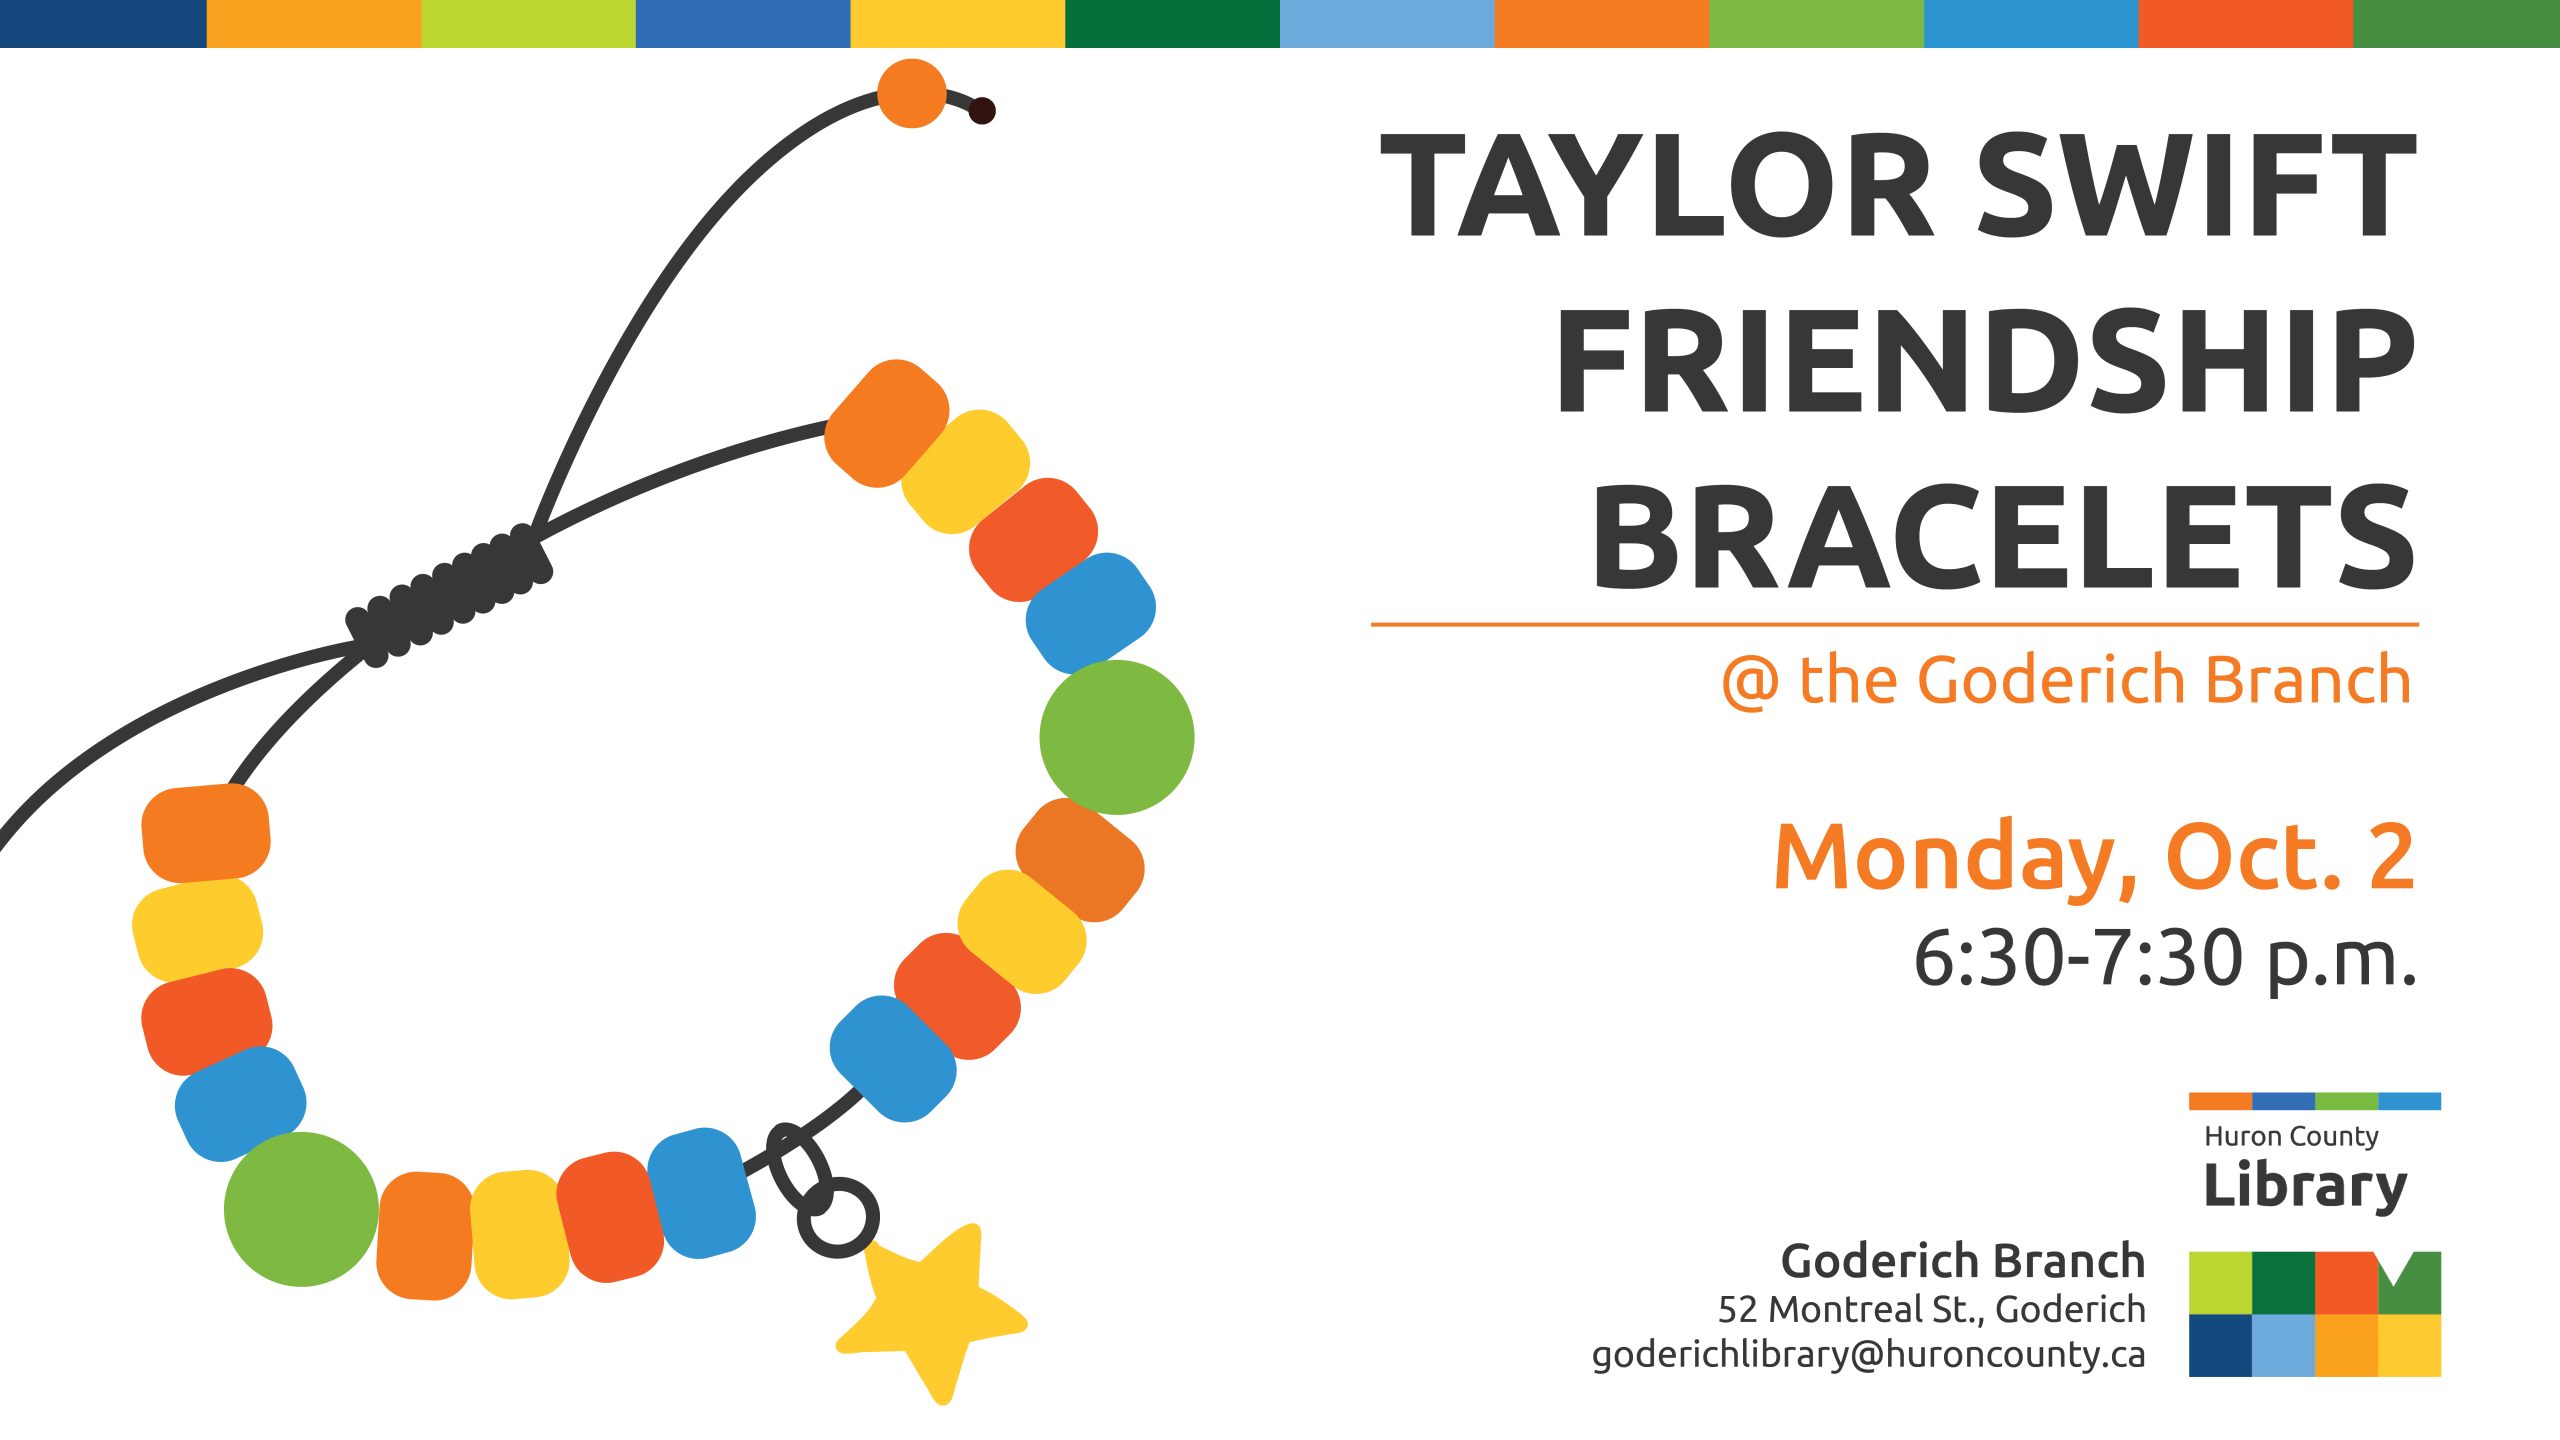 Illustration of a colourful beaded bracelet with text promoting Taylor Swift friendship bracelet workshop at Goderich branch